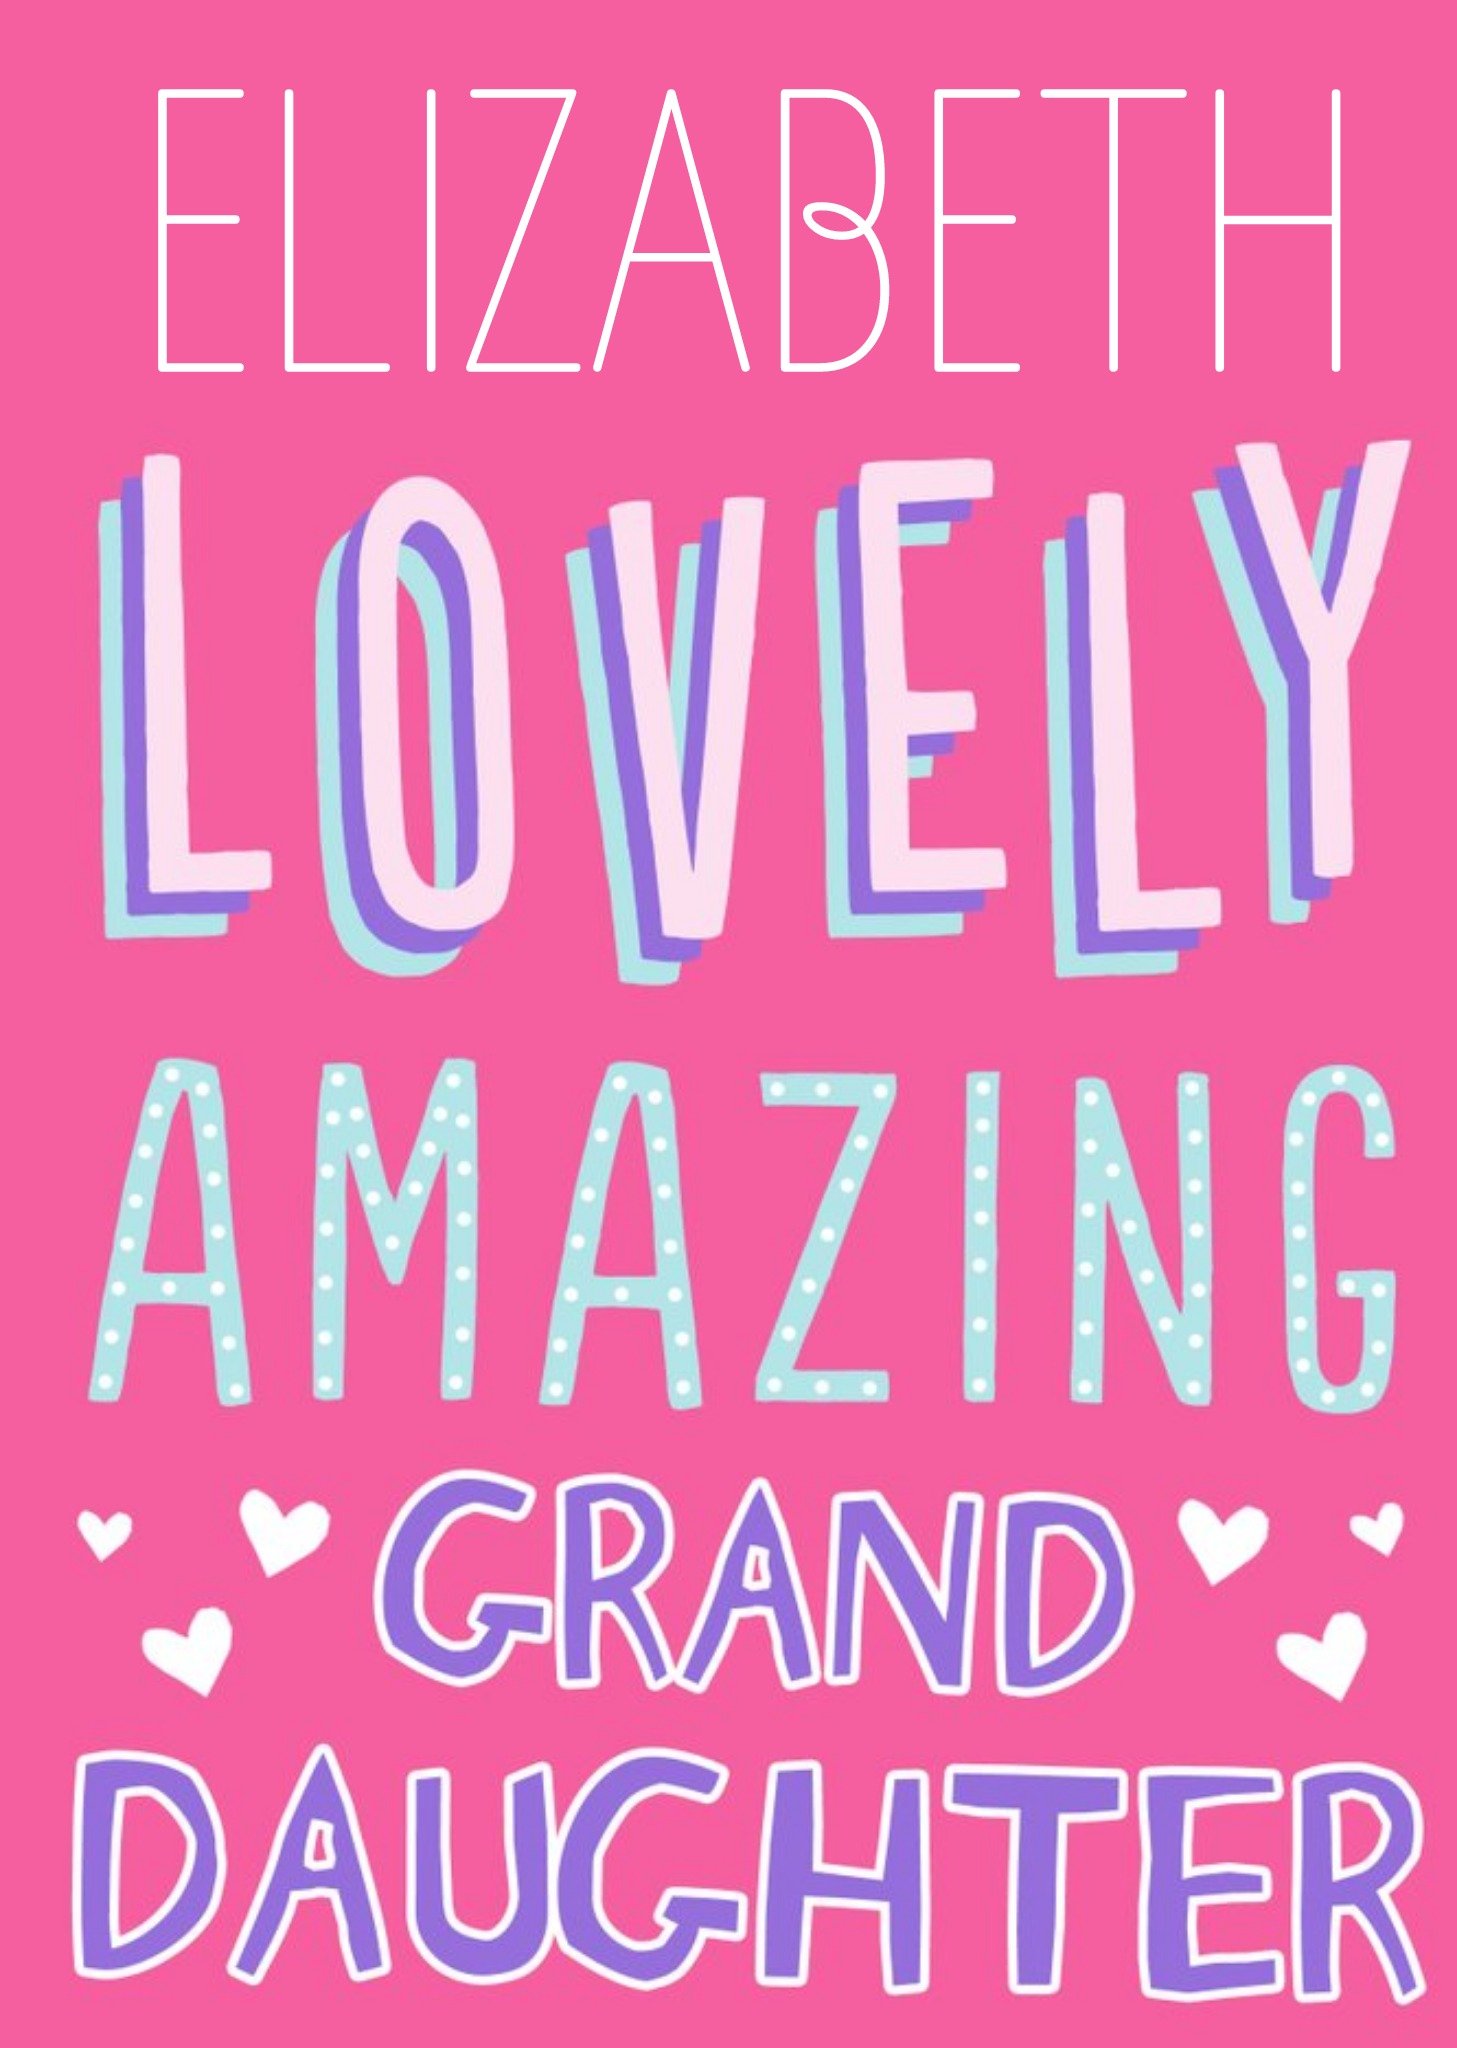 Moonpig Big Bold Type Lovely Amazing Granddaughter Card, Large